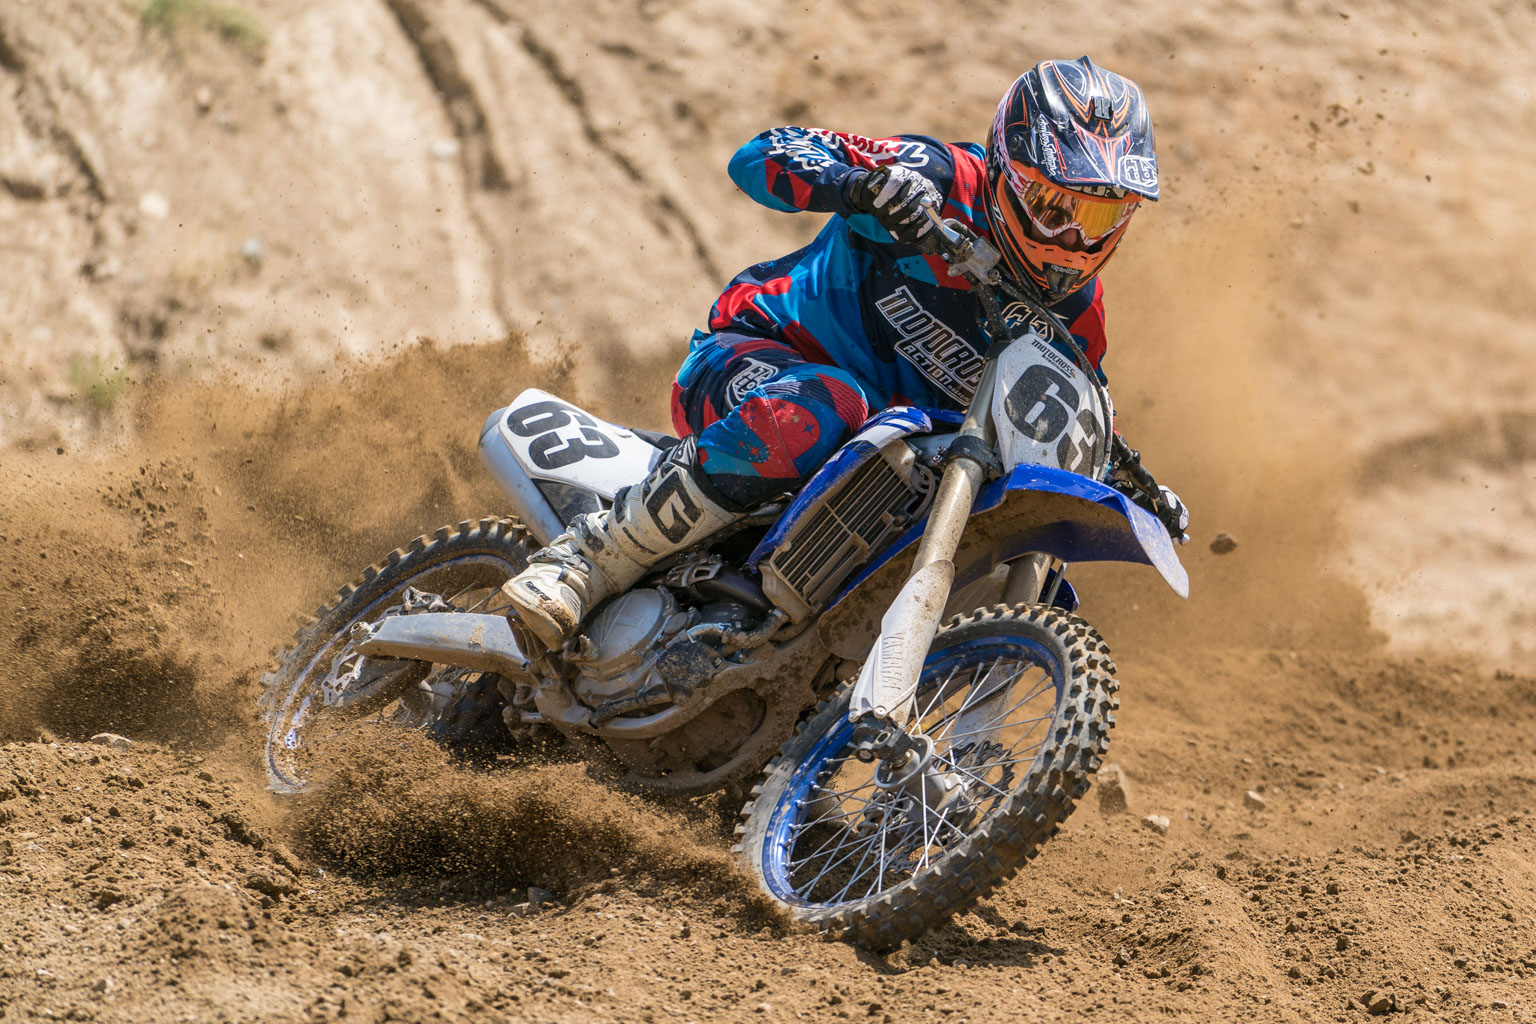 Jon Ortner was determined on the YZF450. He's getting ready for the World Vets